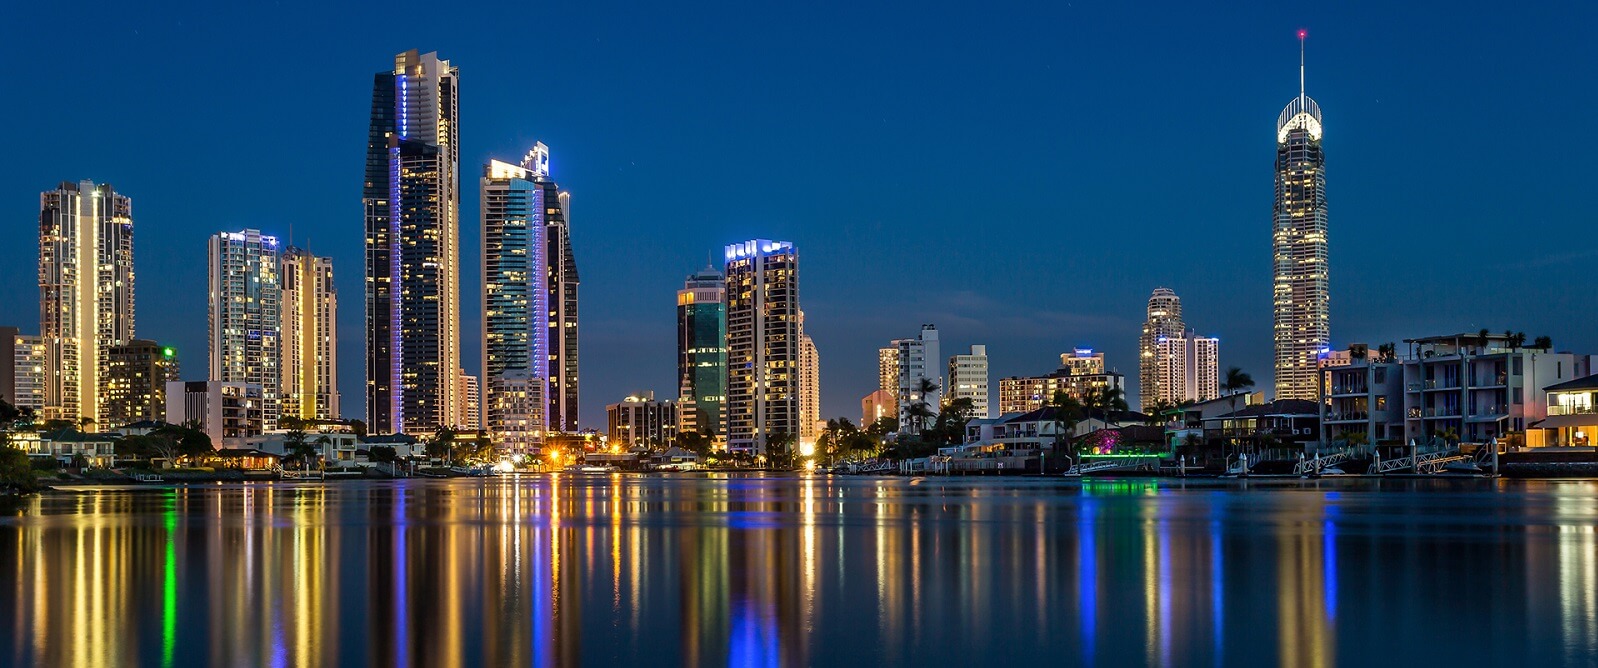 What is there to do in Gold Coast at night?